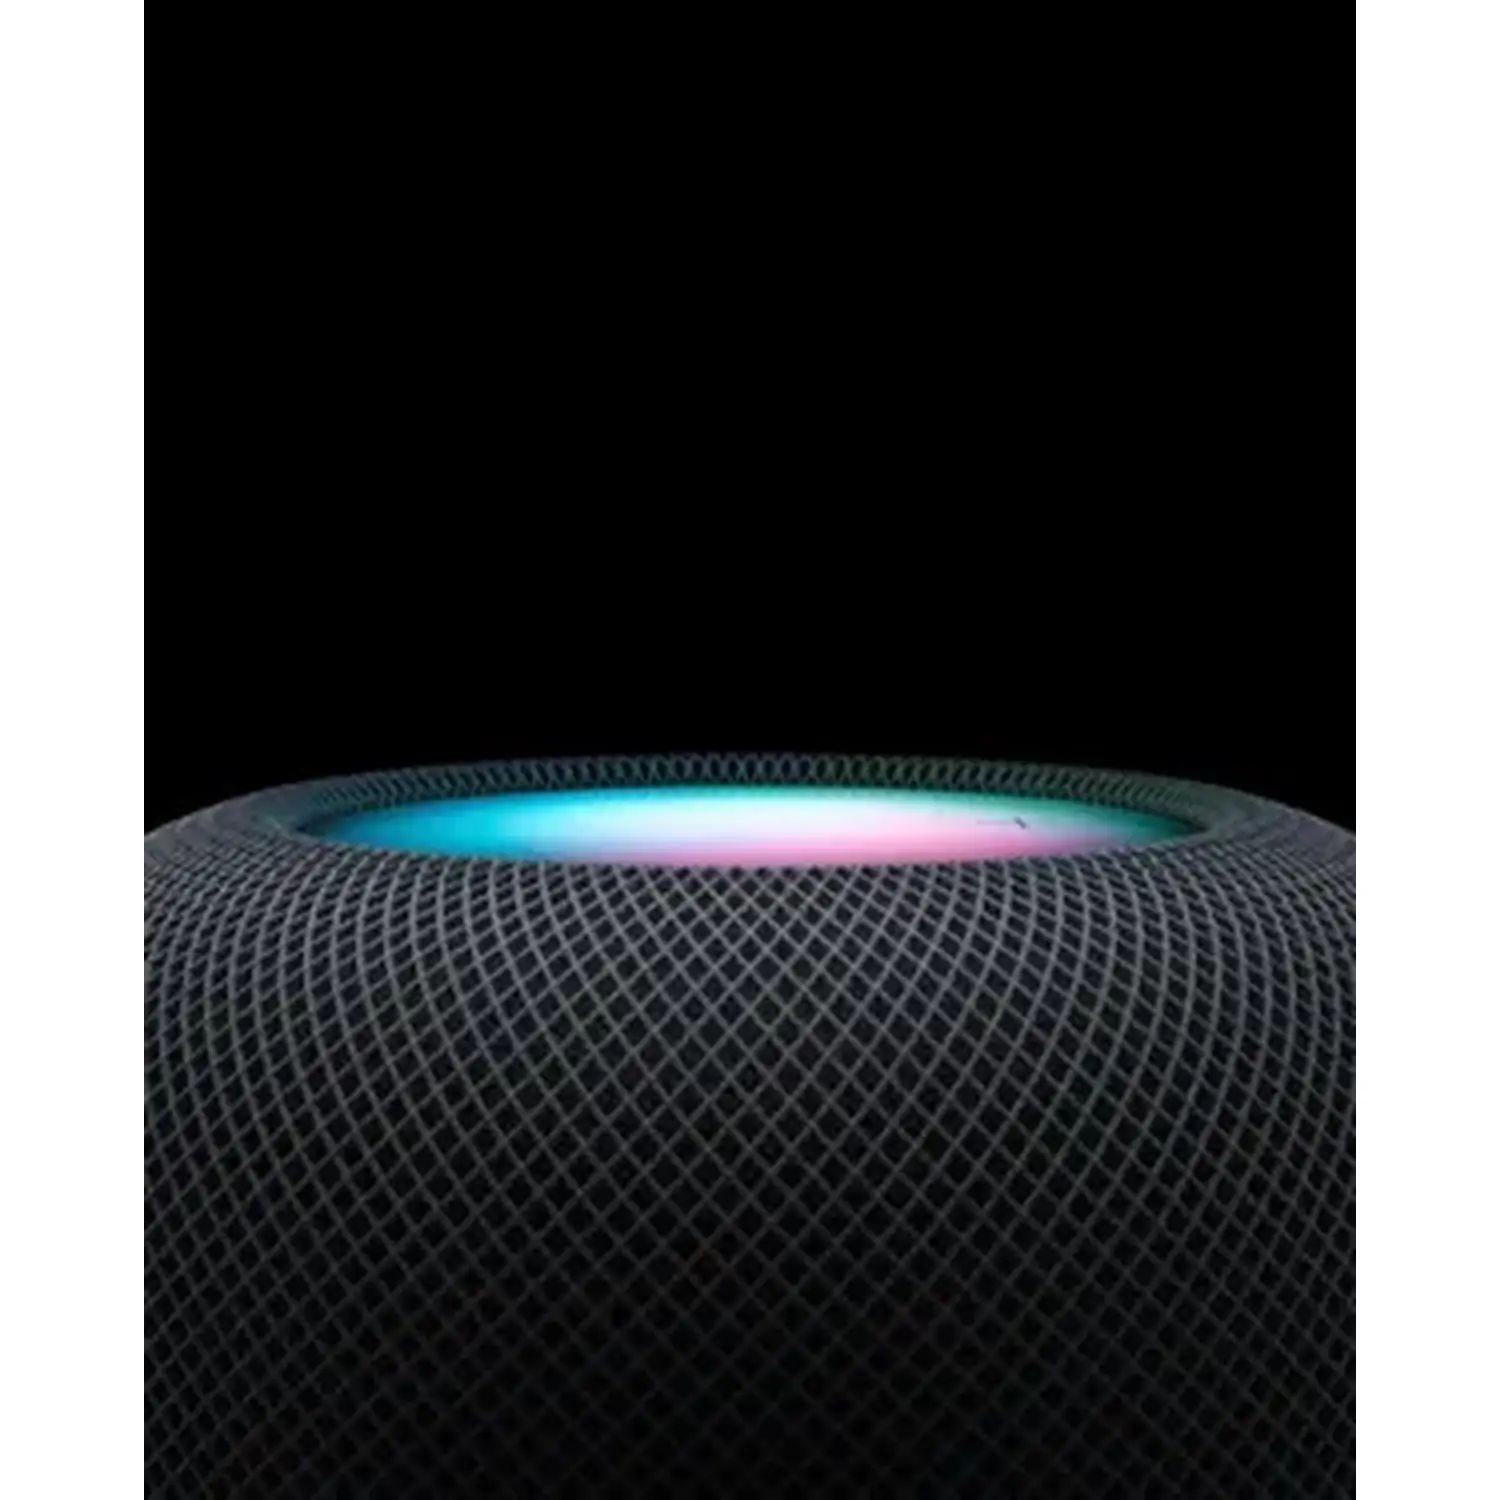 Buy Apple Music with Clear Vocals Listening 2: Homepod Smart Spot Sweet